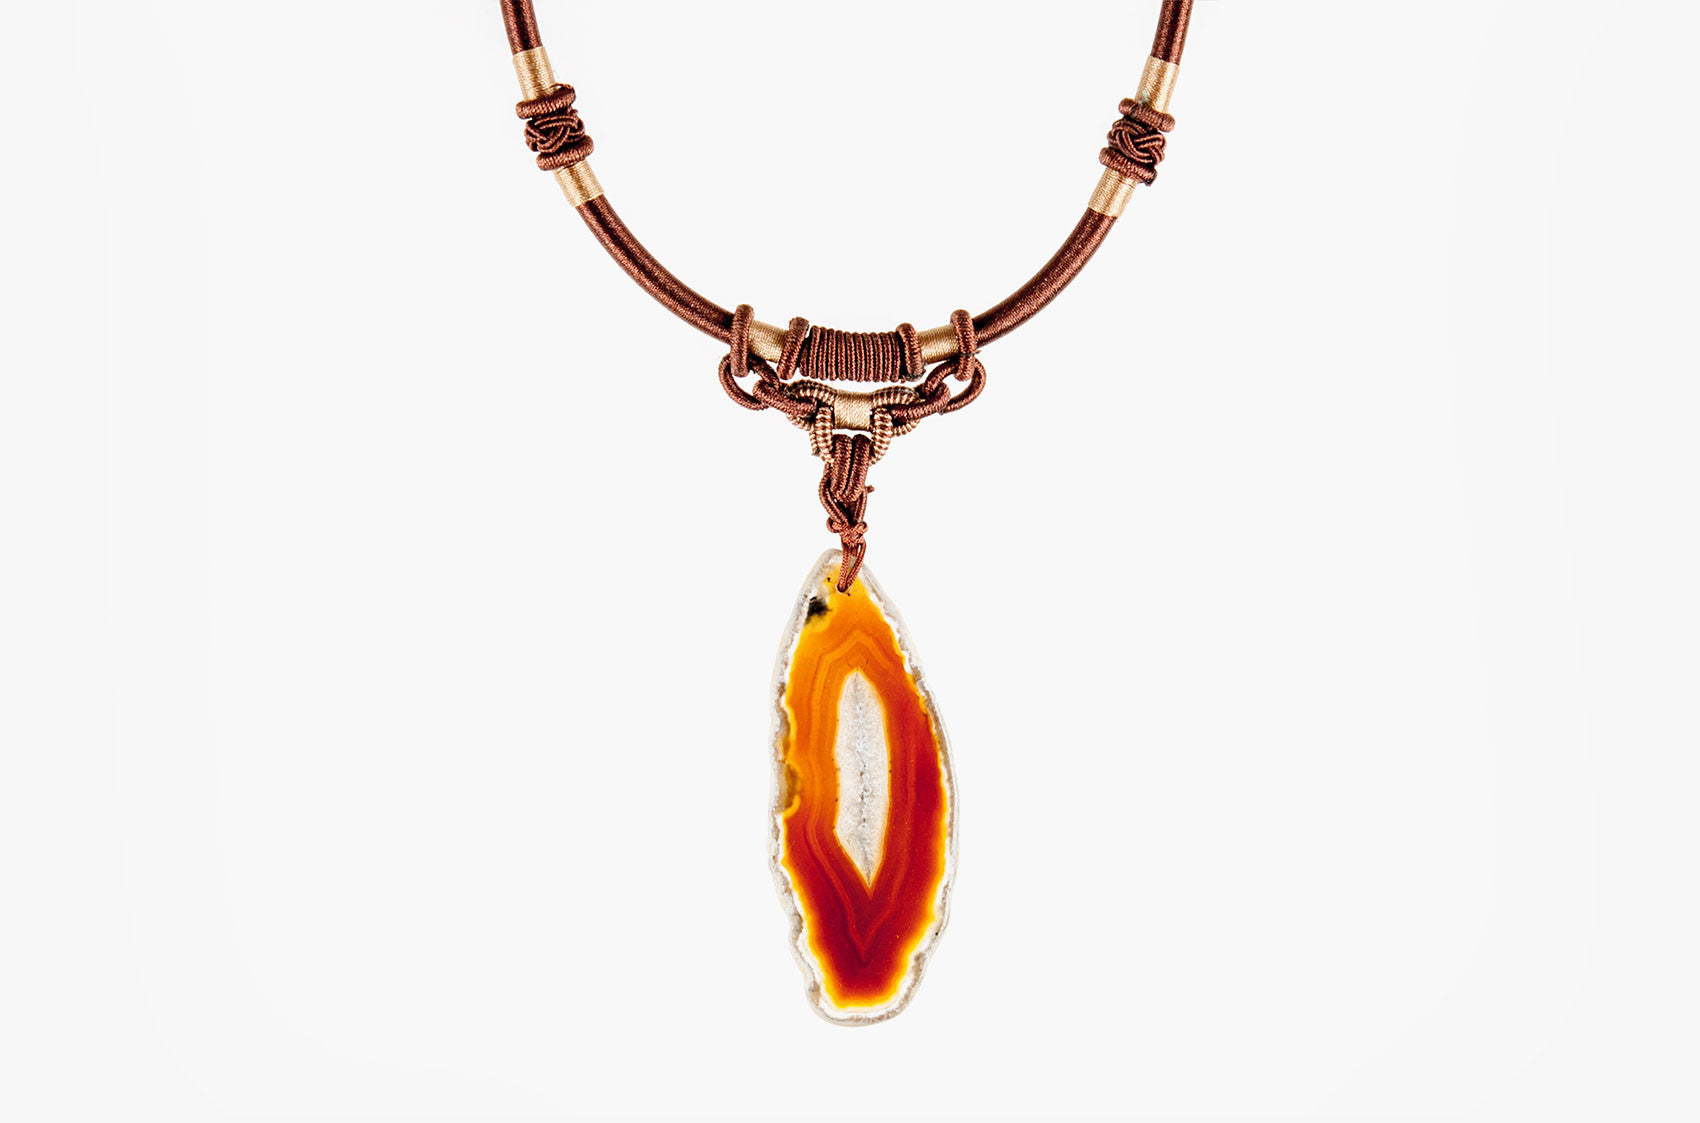 Tribal woven necklace with agate pendant